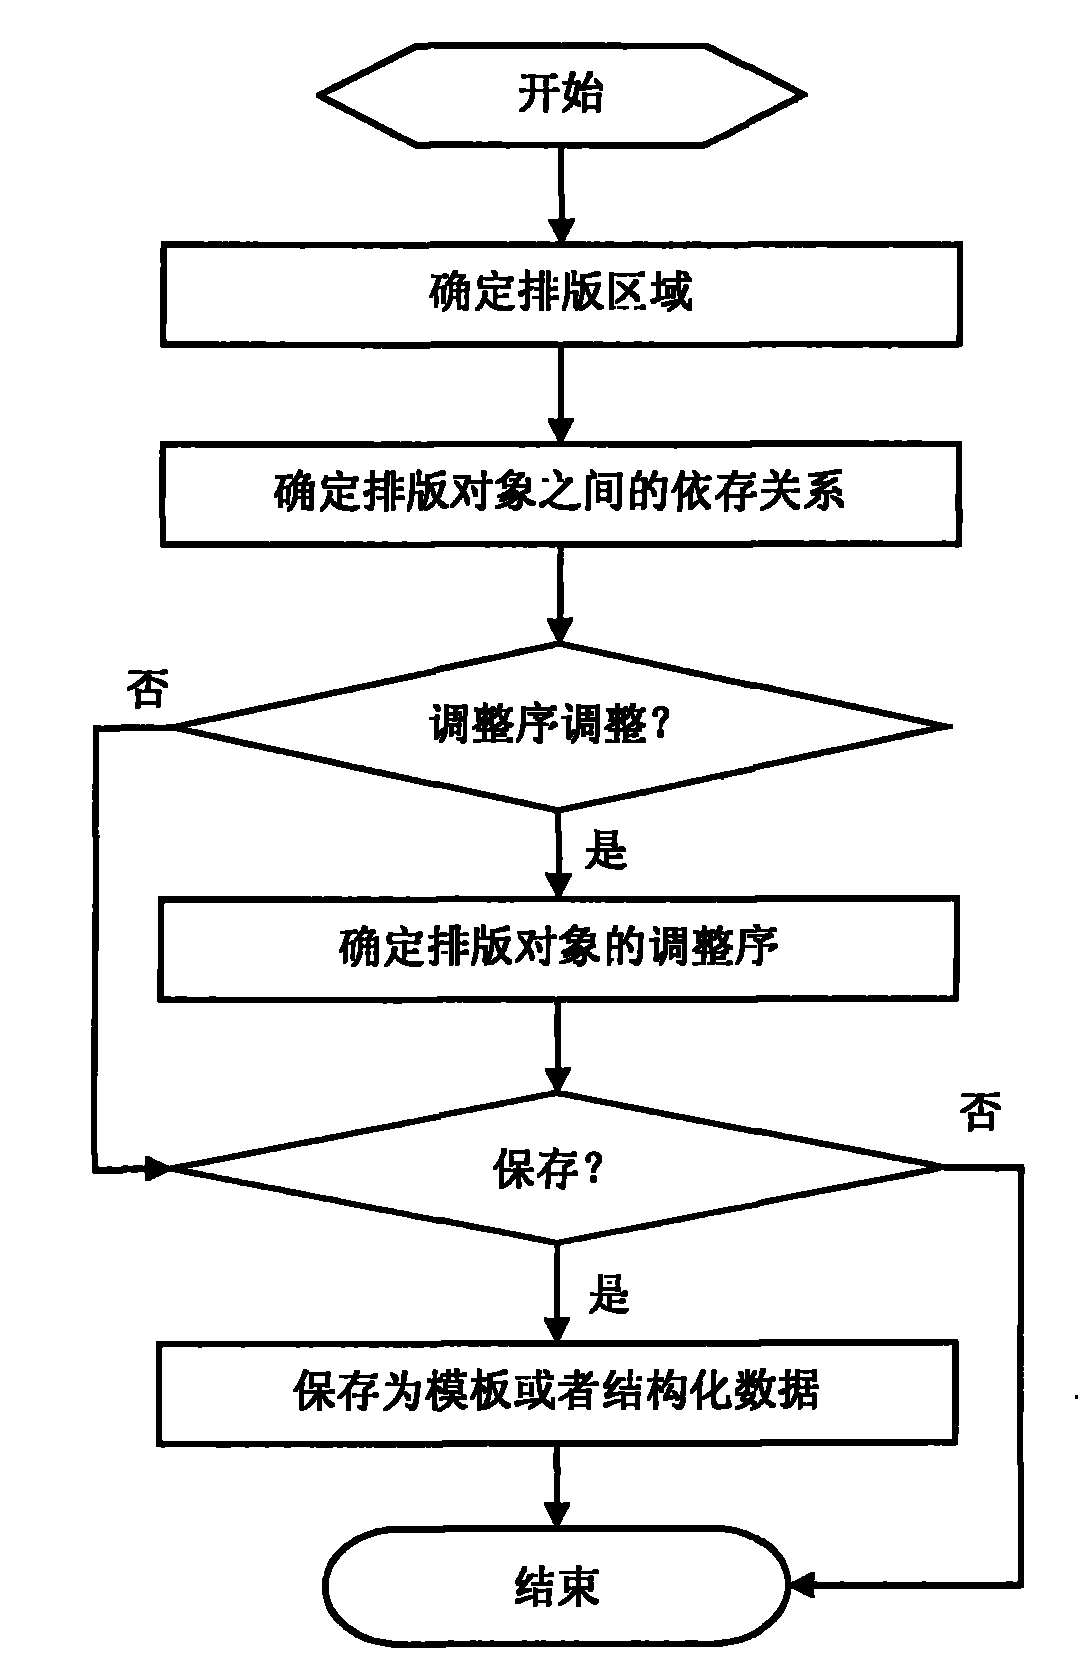 Automatic typesetting method and system based on dependency relationship of typesetting objects